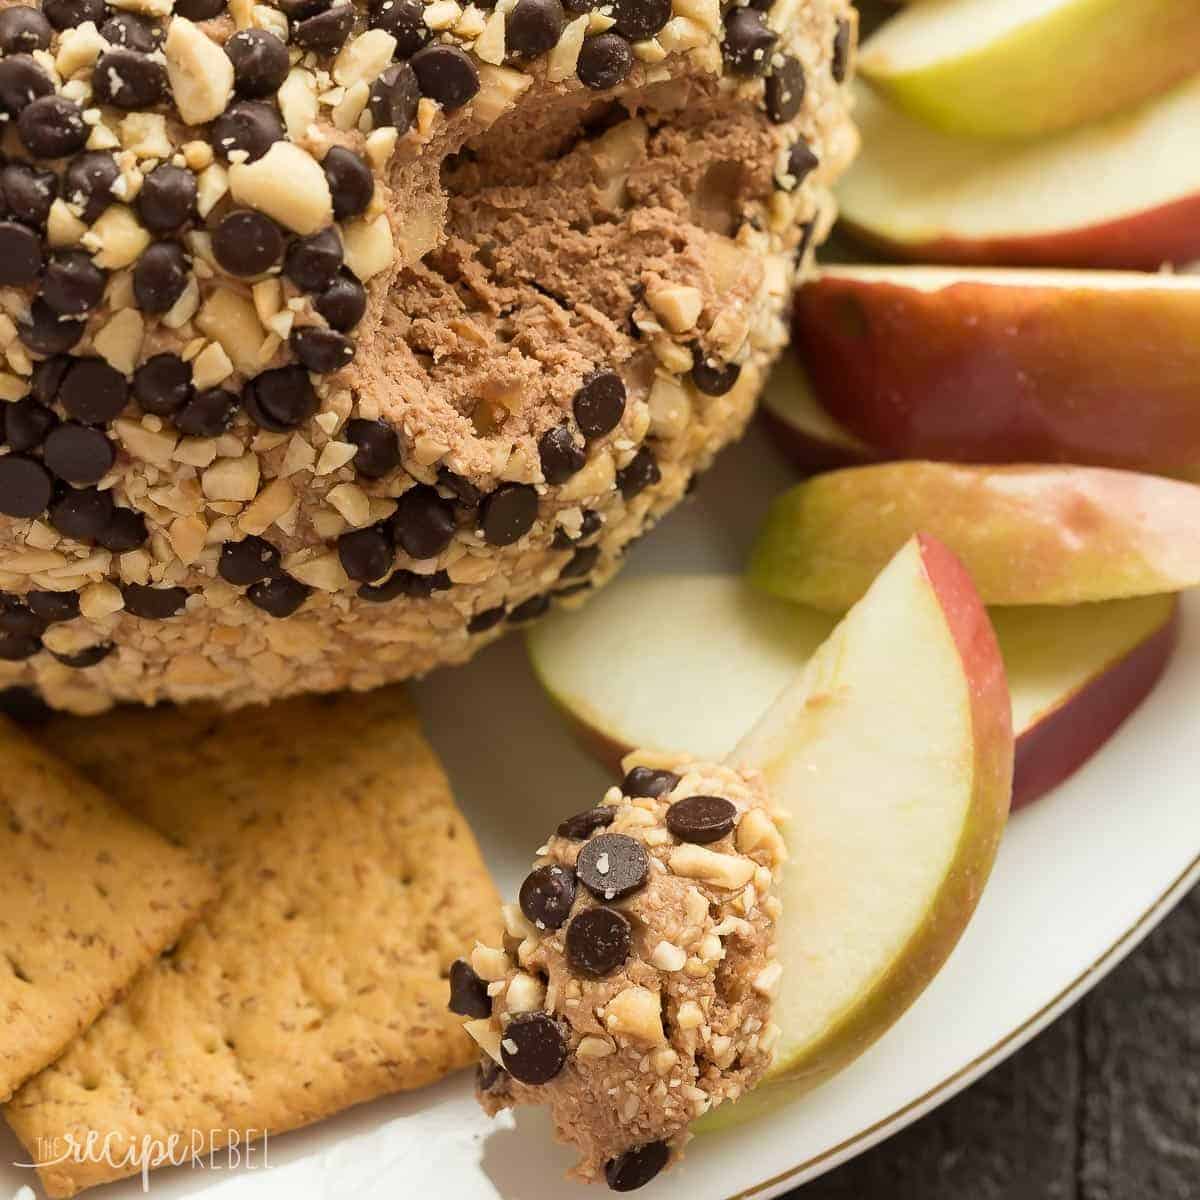 snickers cheese ball spread on apple slice on plate